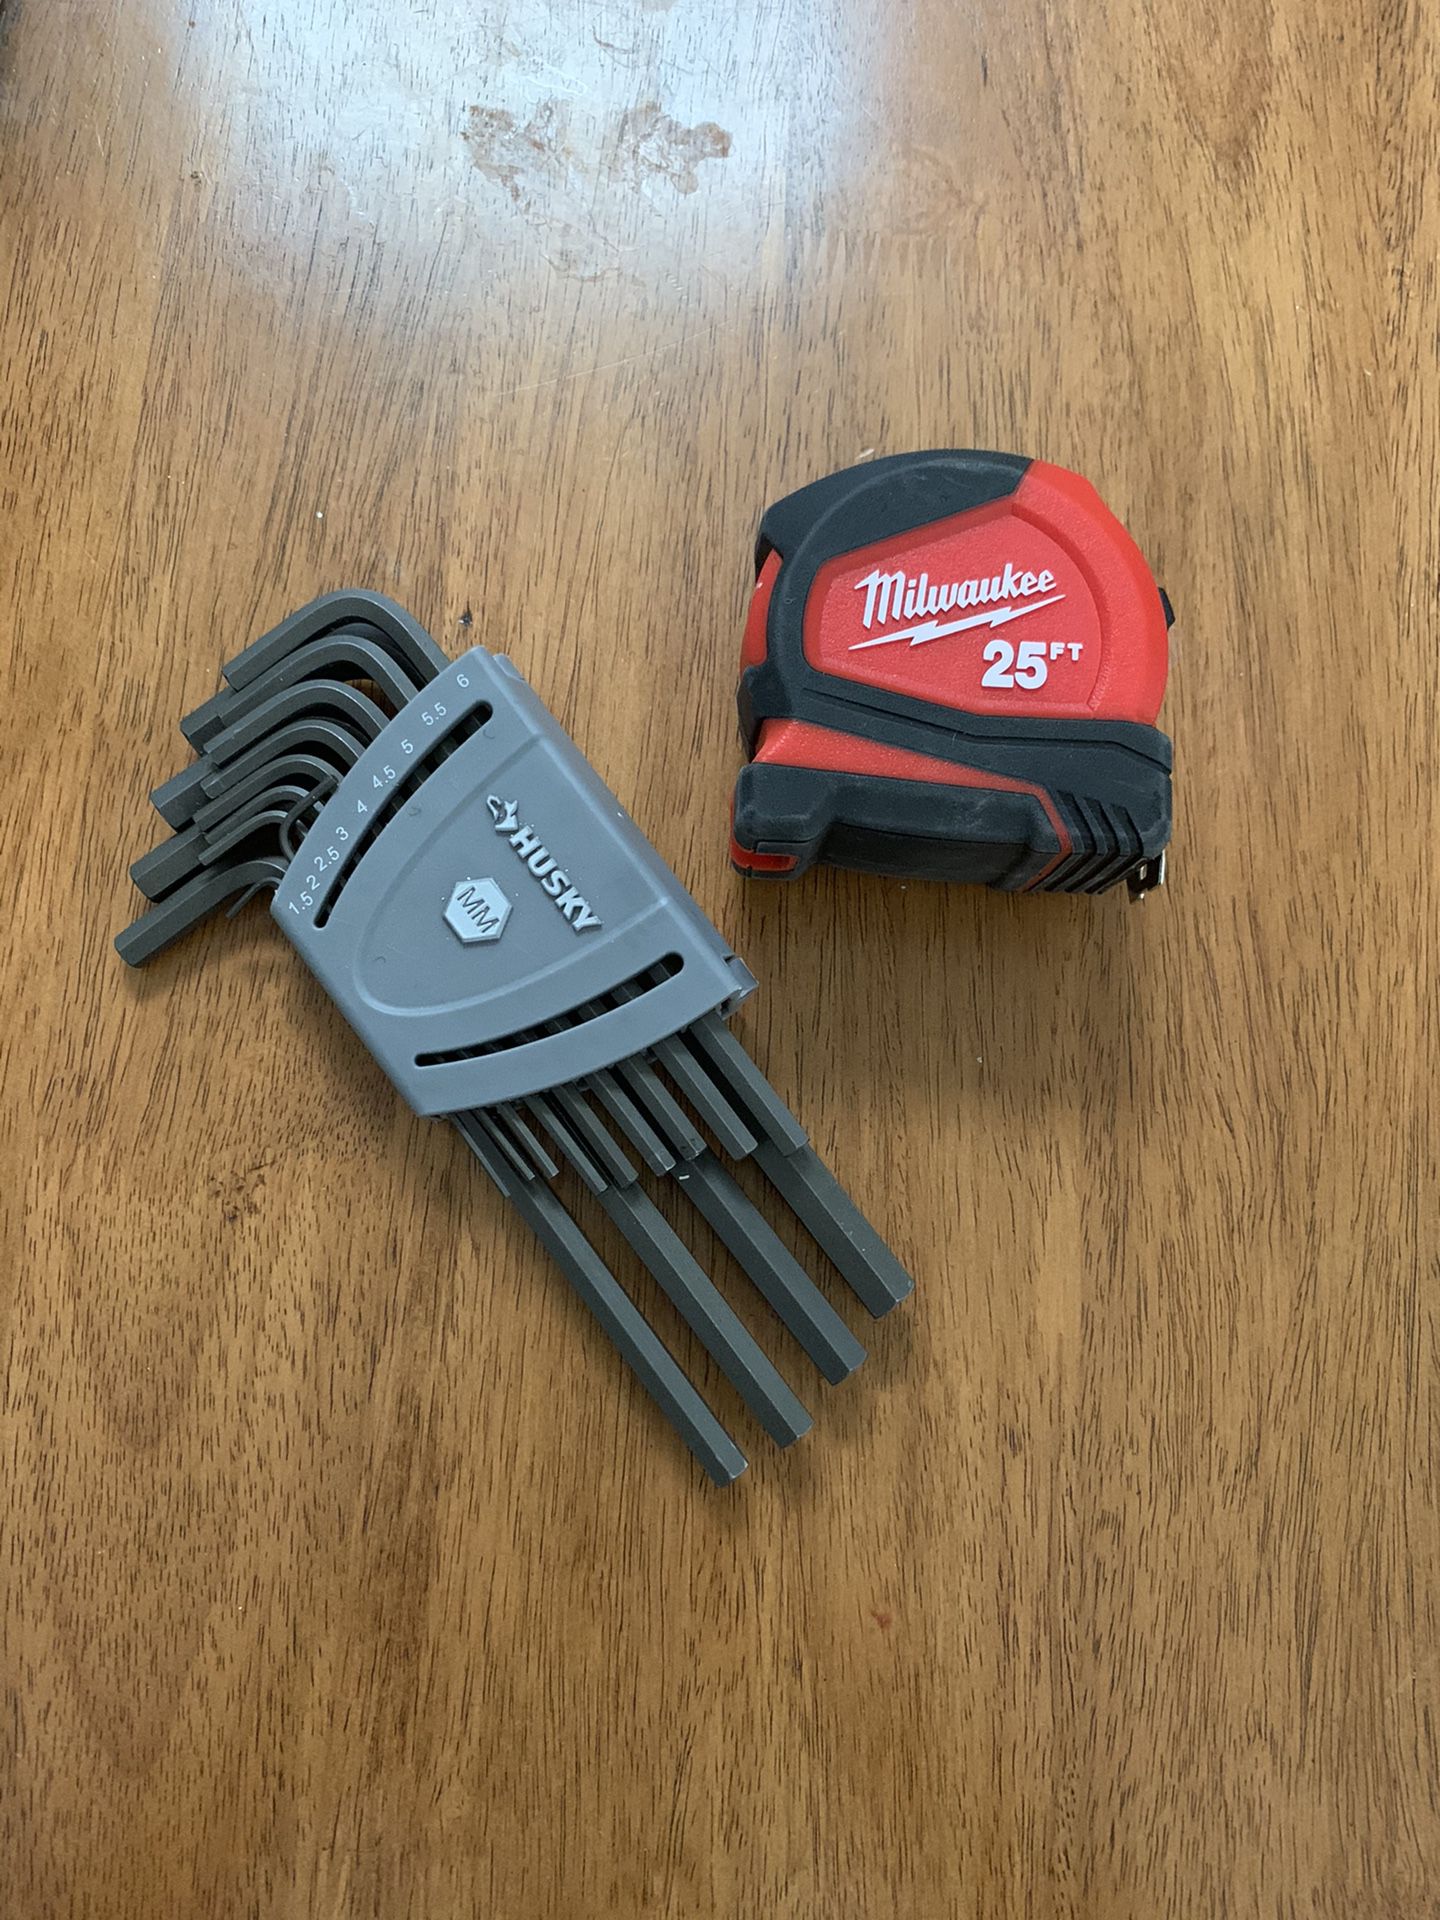 Multiple Allen wrenches and 25 ft measuring tape